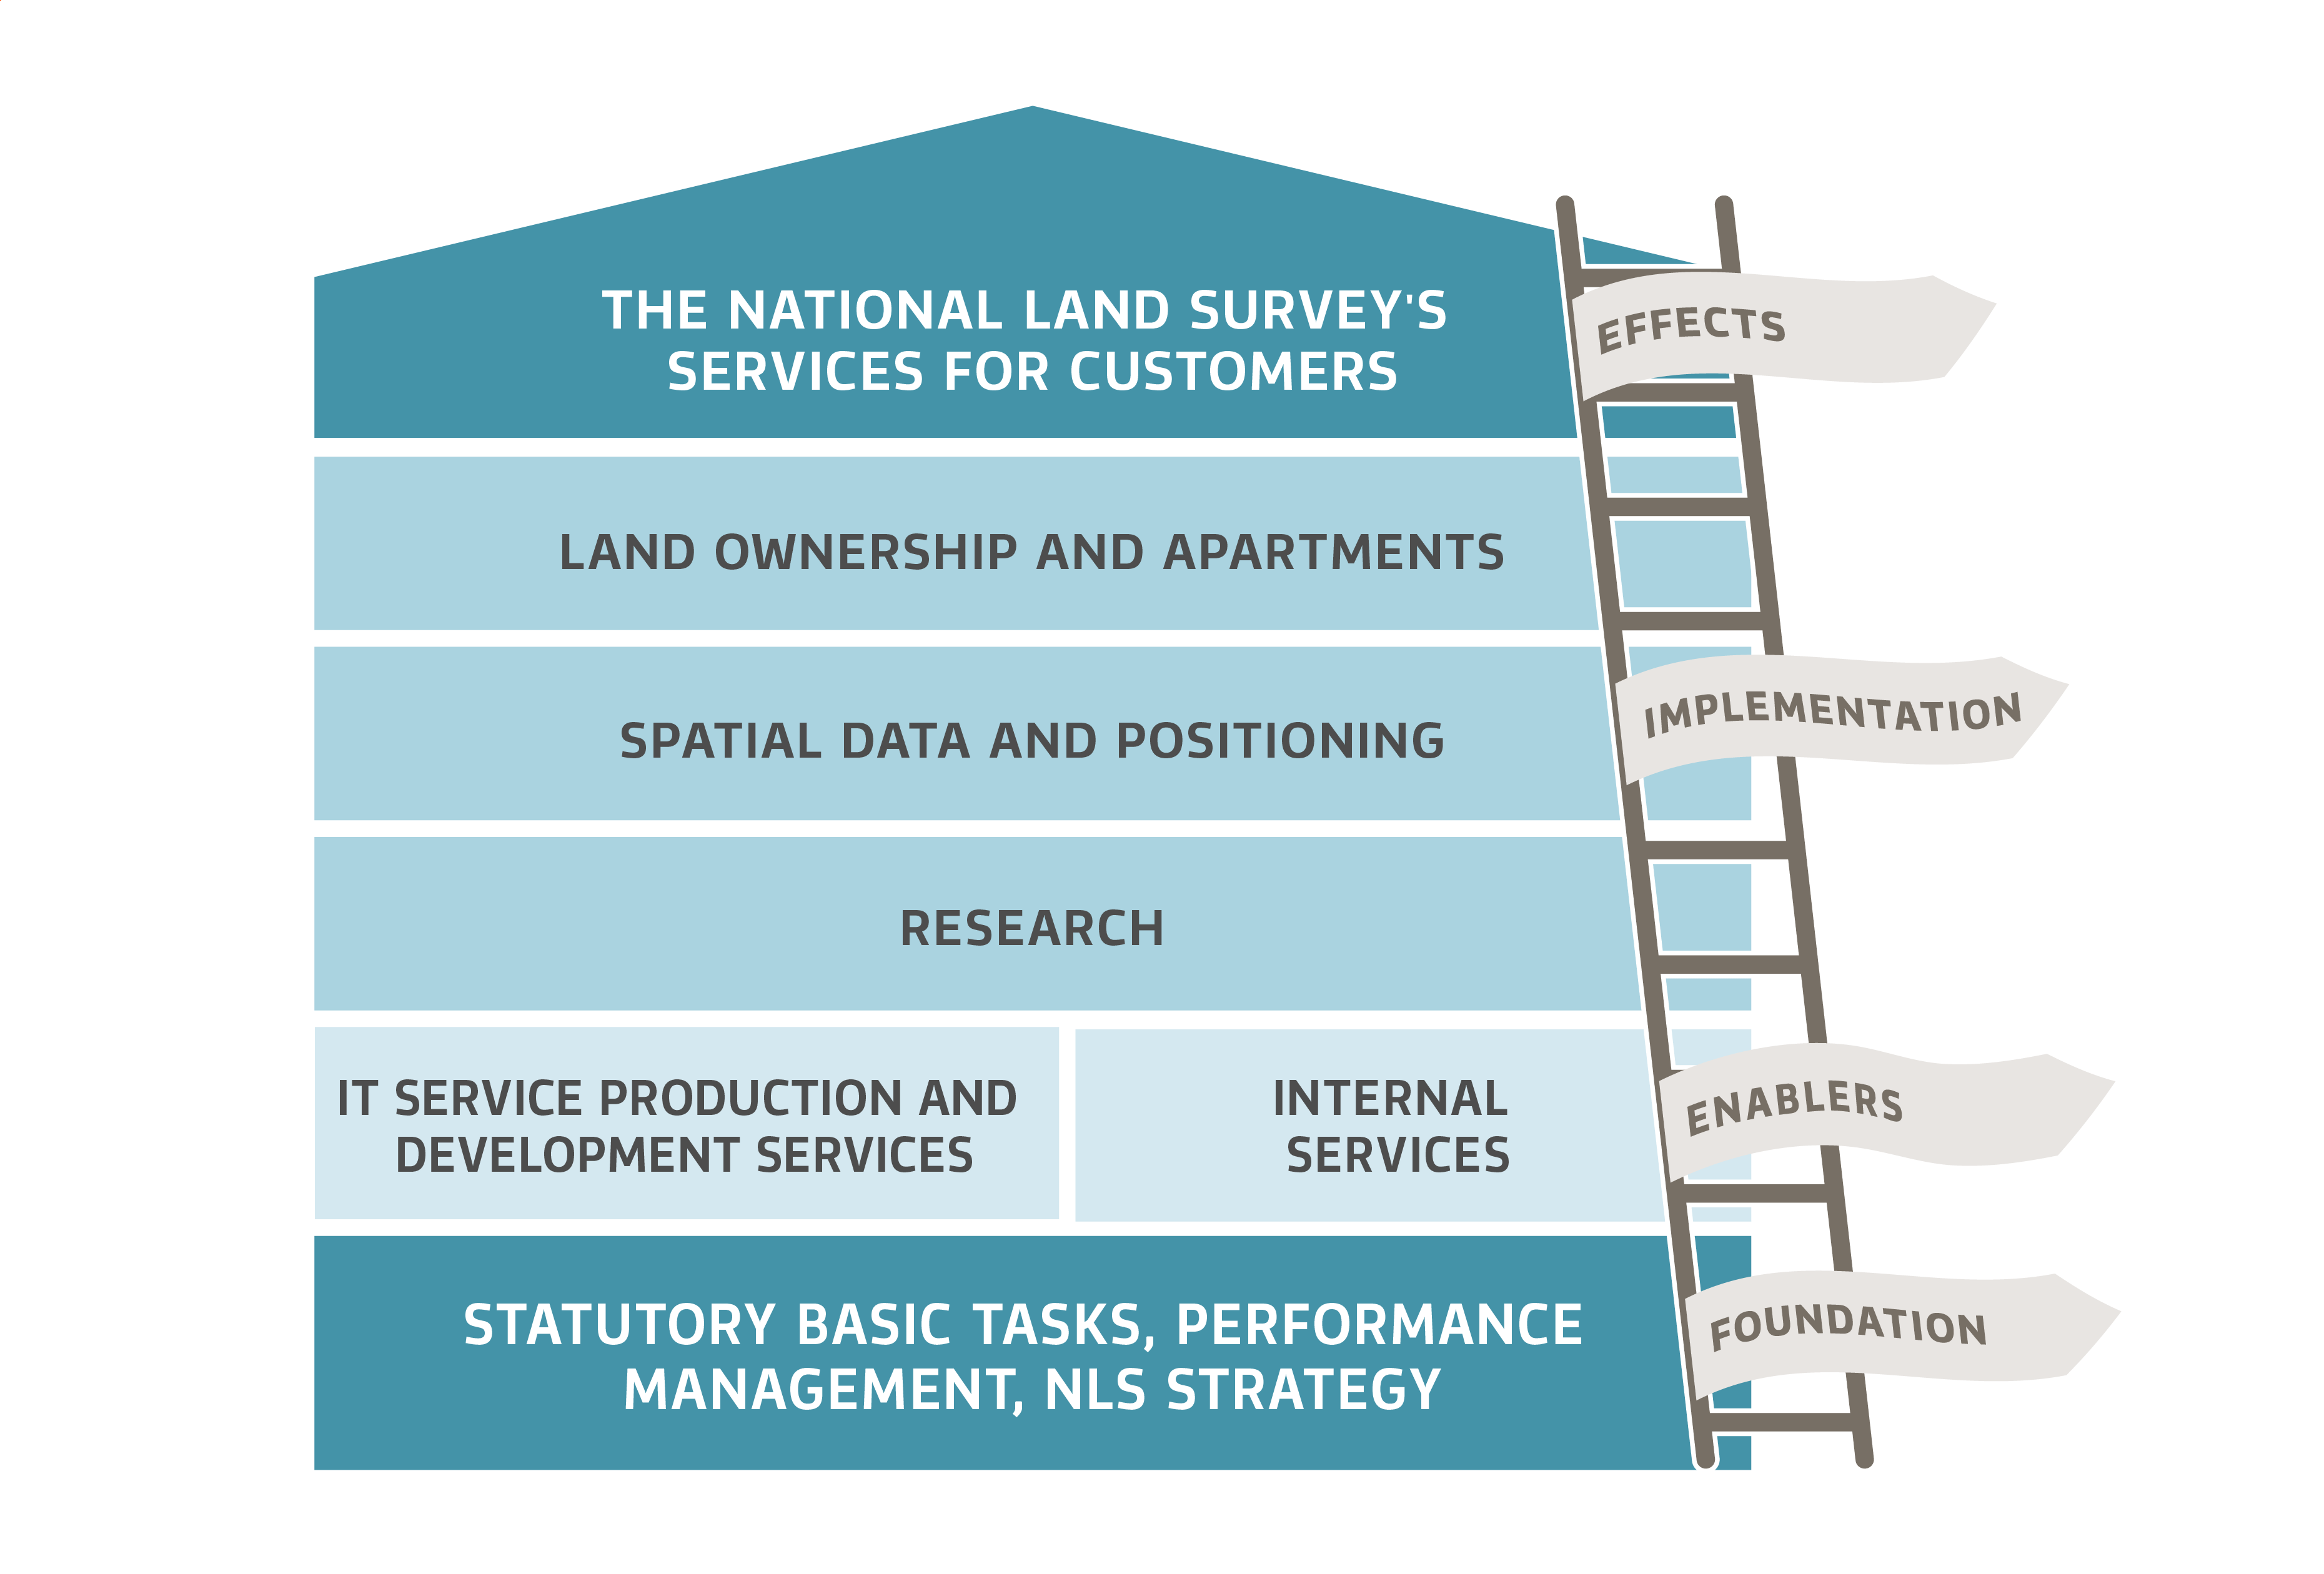 Services of the National Land Survey.